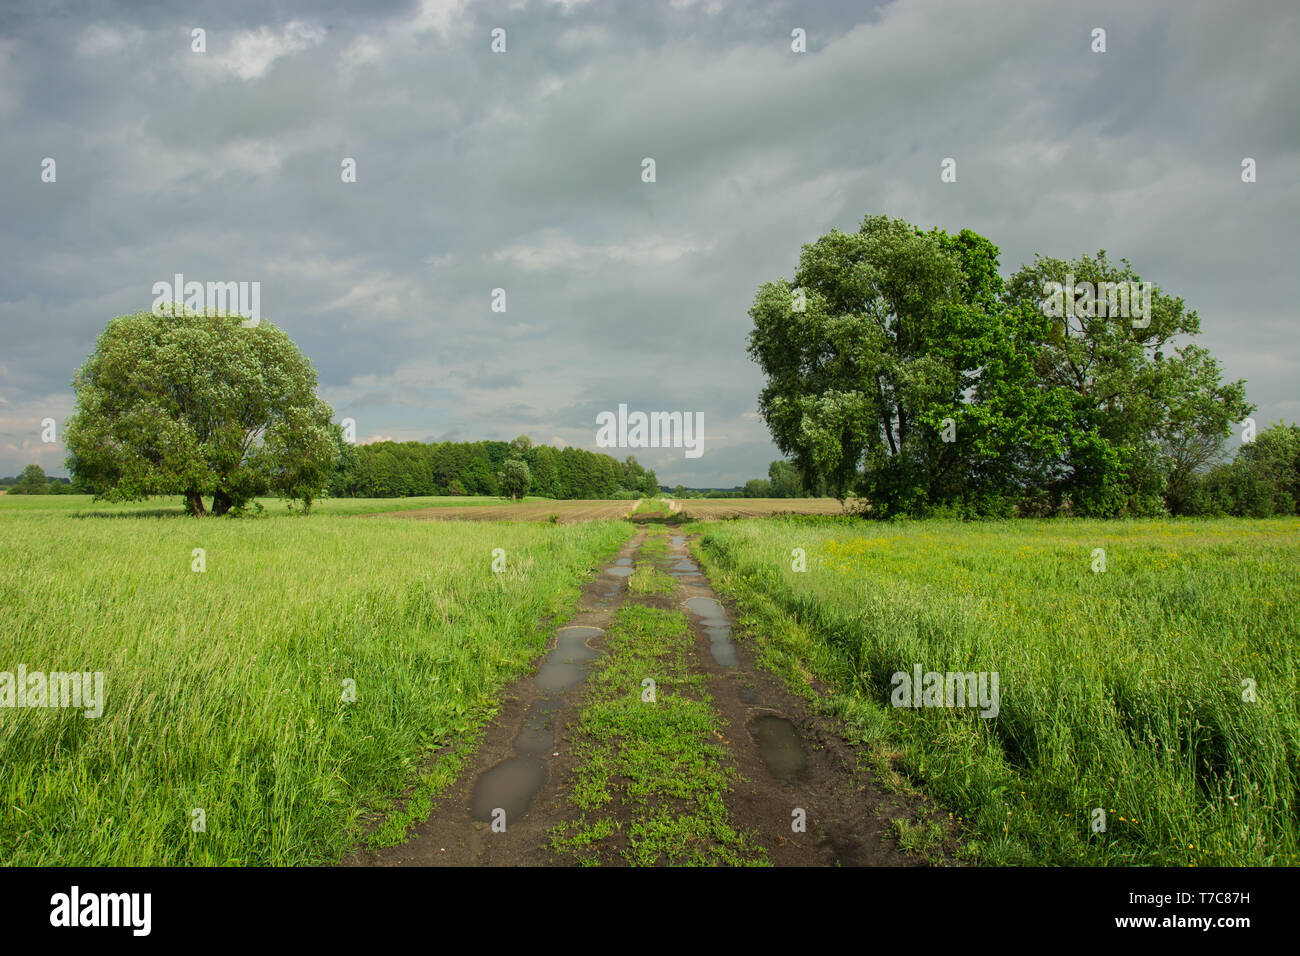 Road with puddles through a green meadow with tall grasses, large trees and a cloudy rainy sky Stock Photo